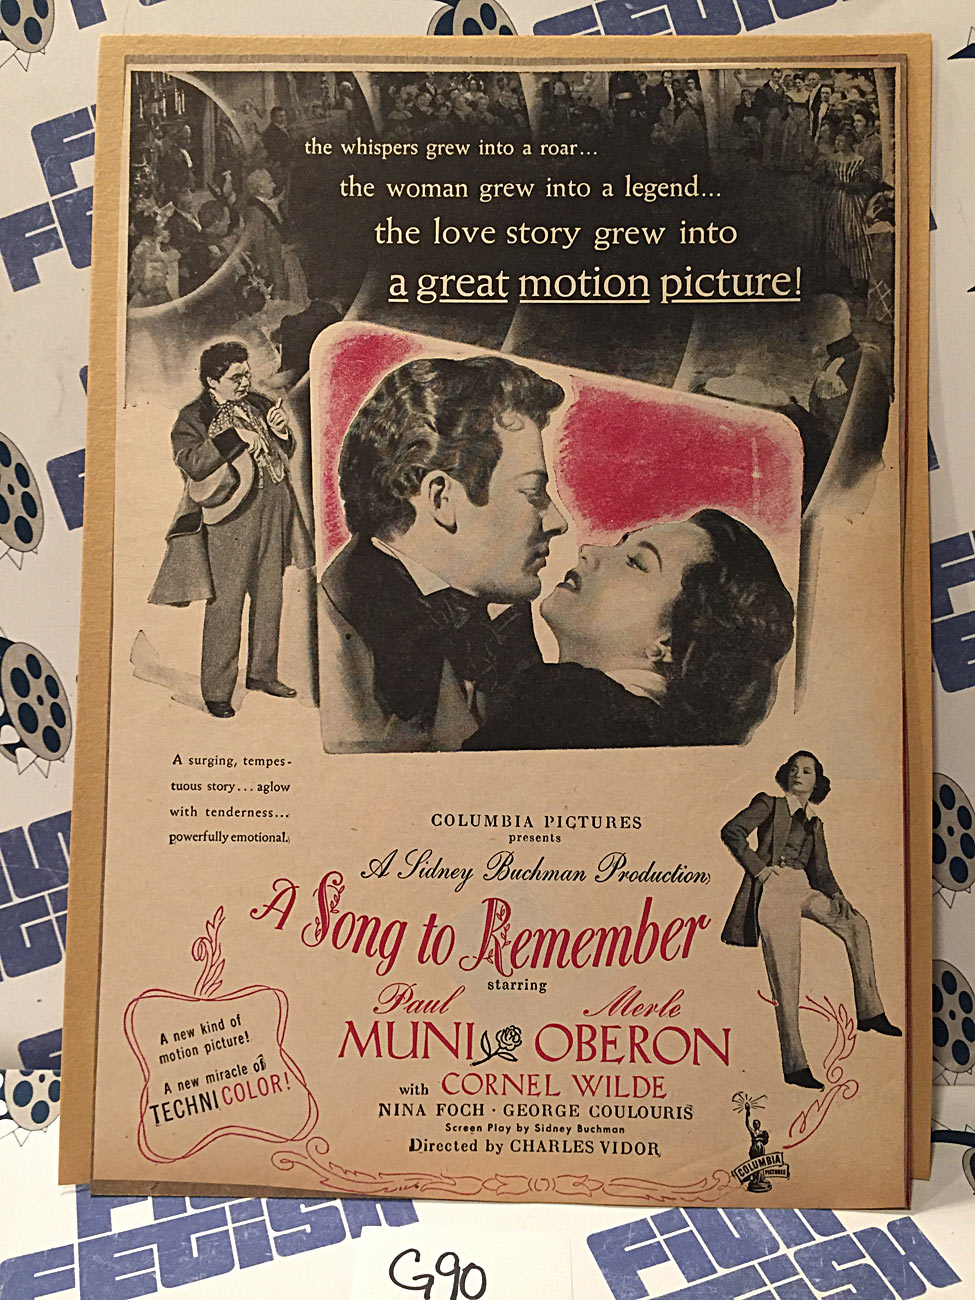 A Song to Remember 1945 Original Full-Page Magazine Ad Paul Muni Merle Oberon G90